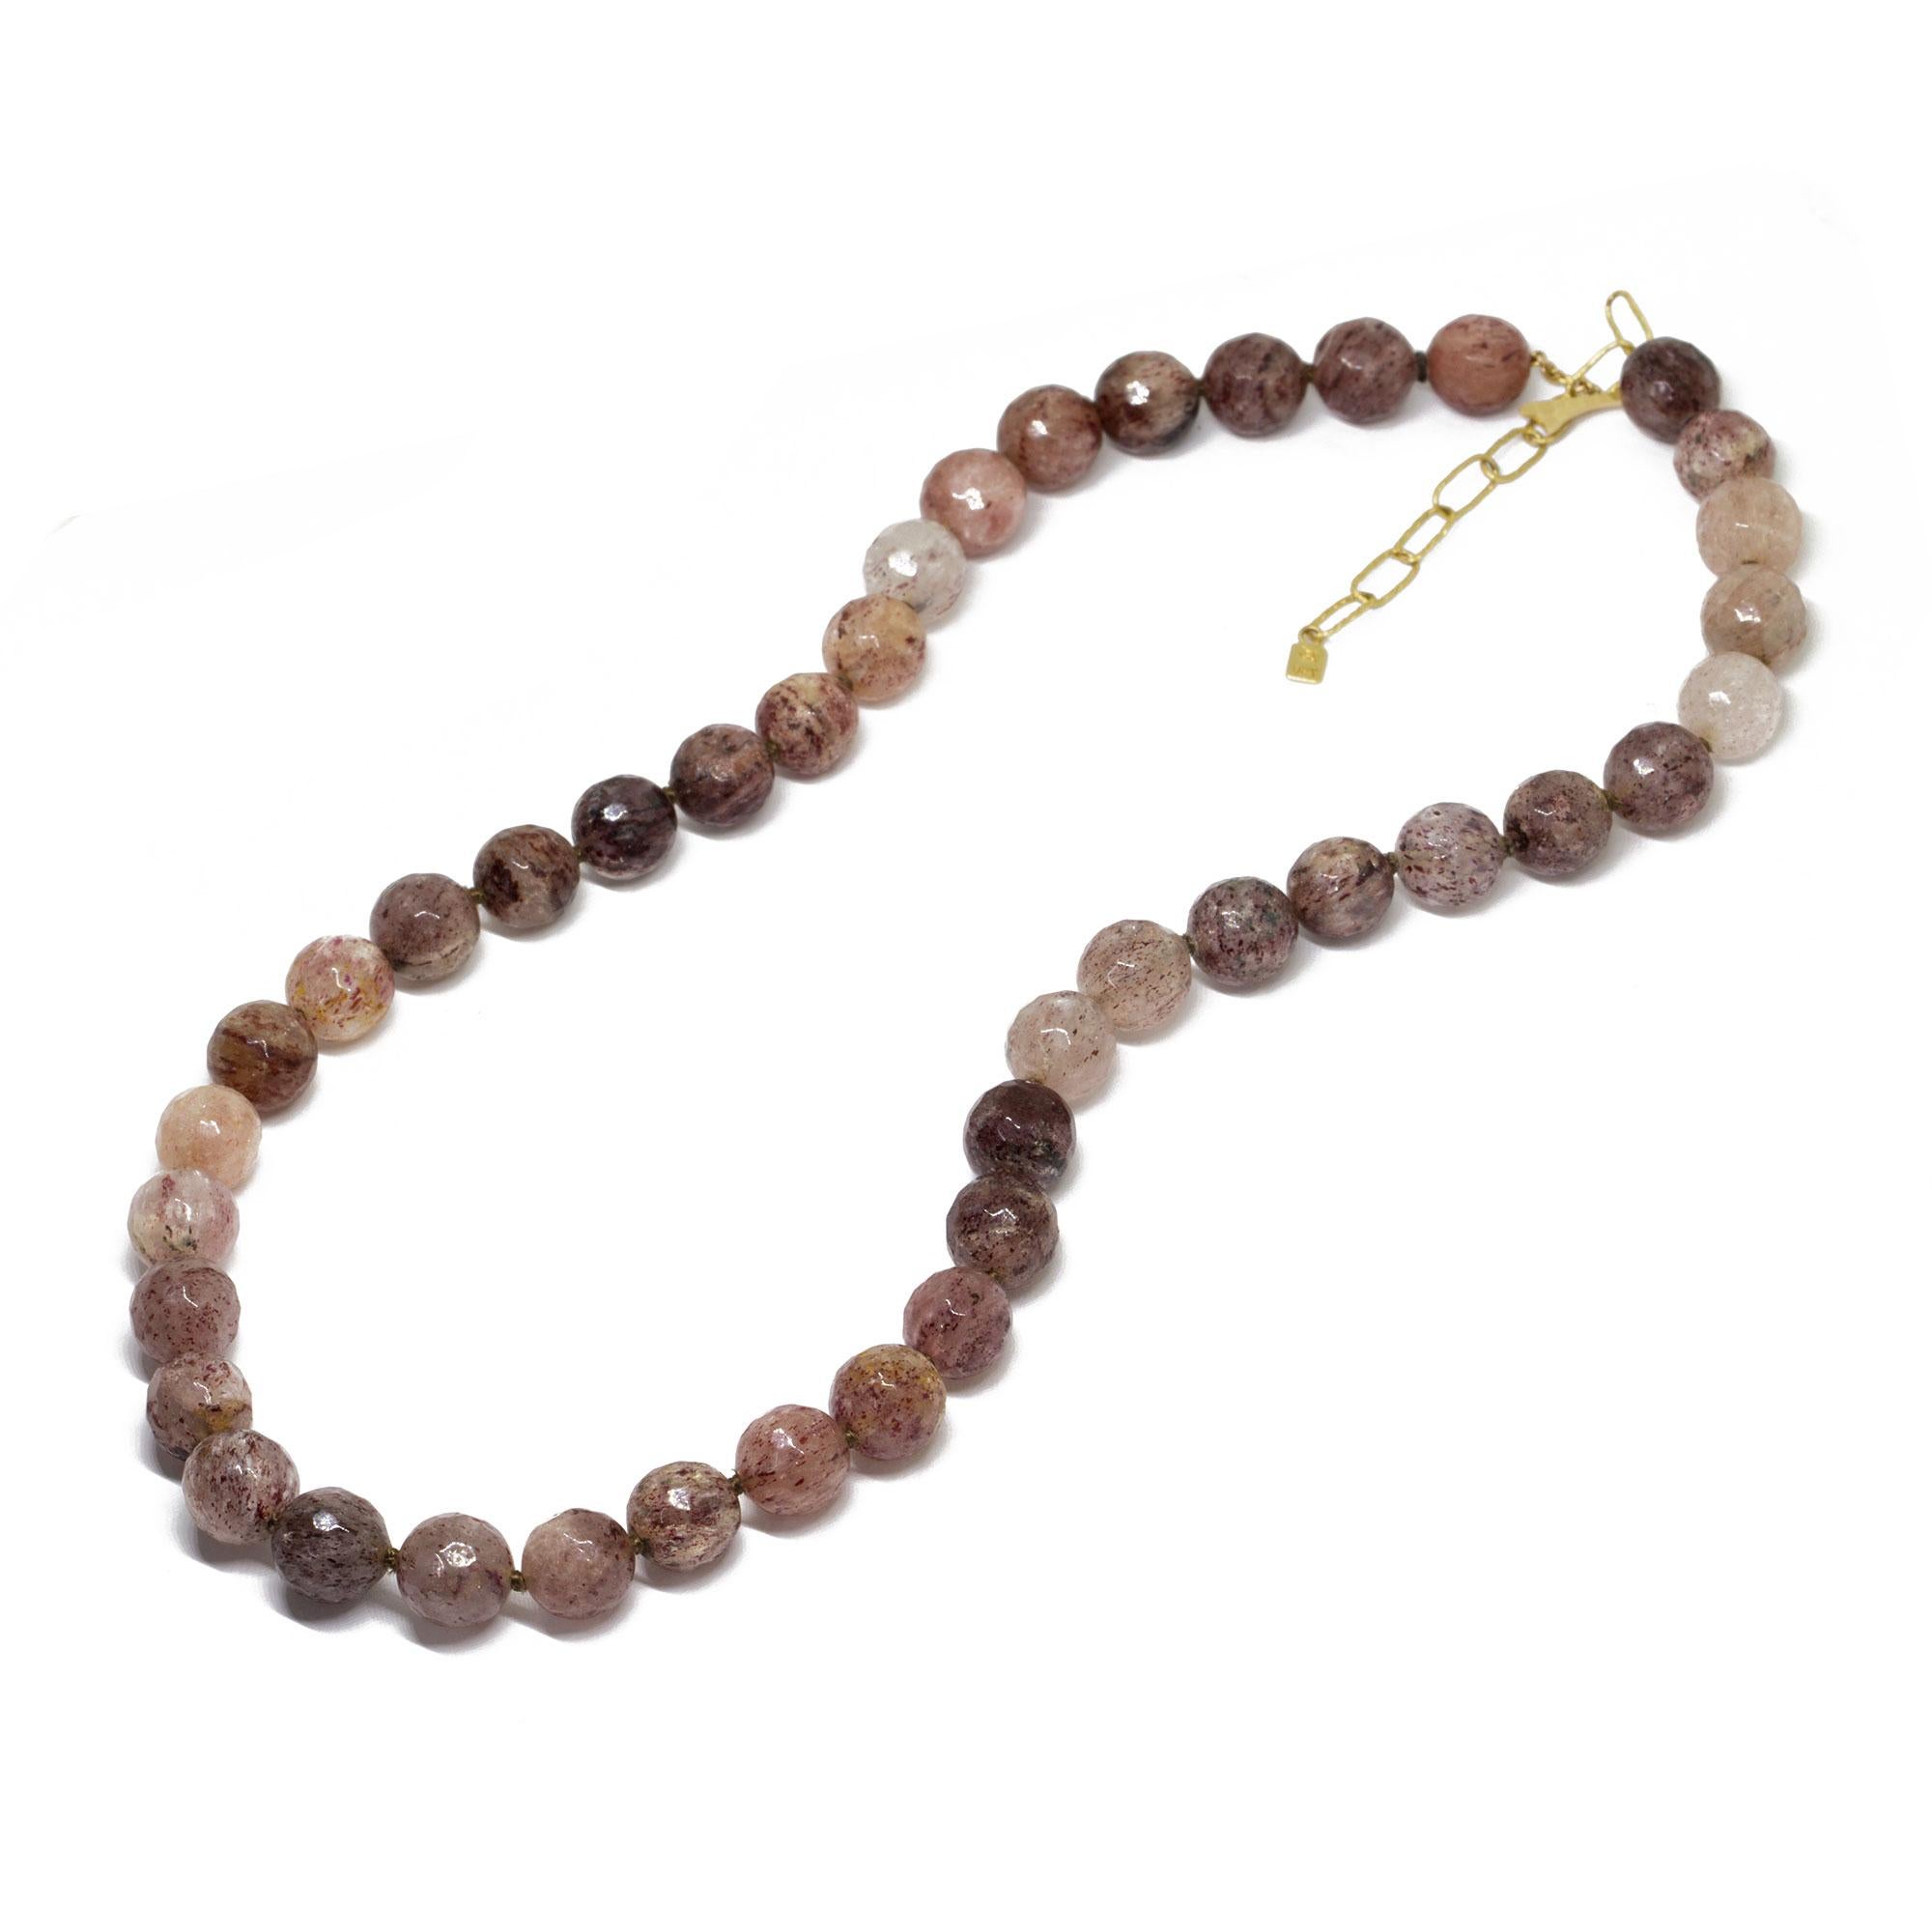 brown bead necklace meaning